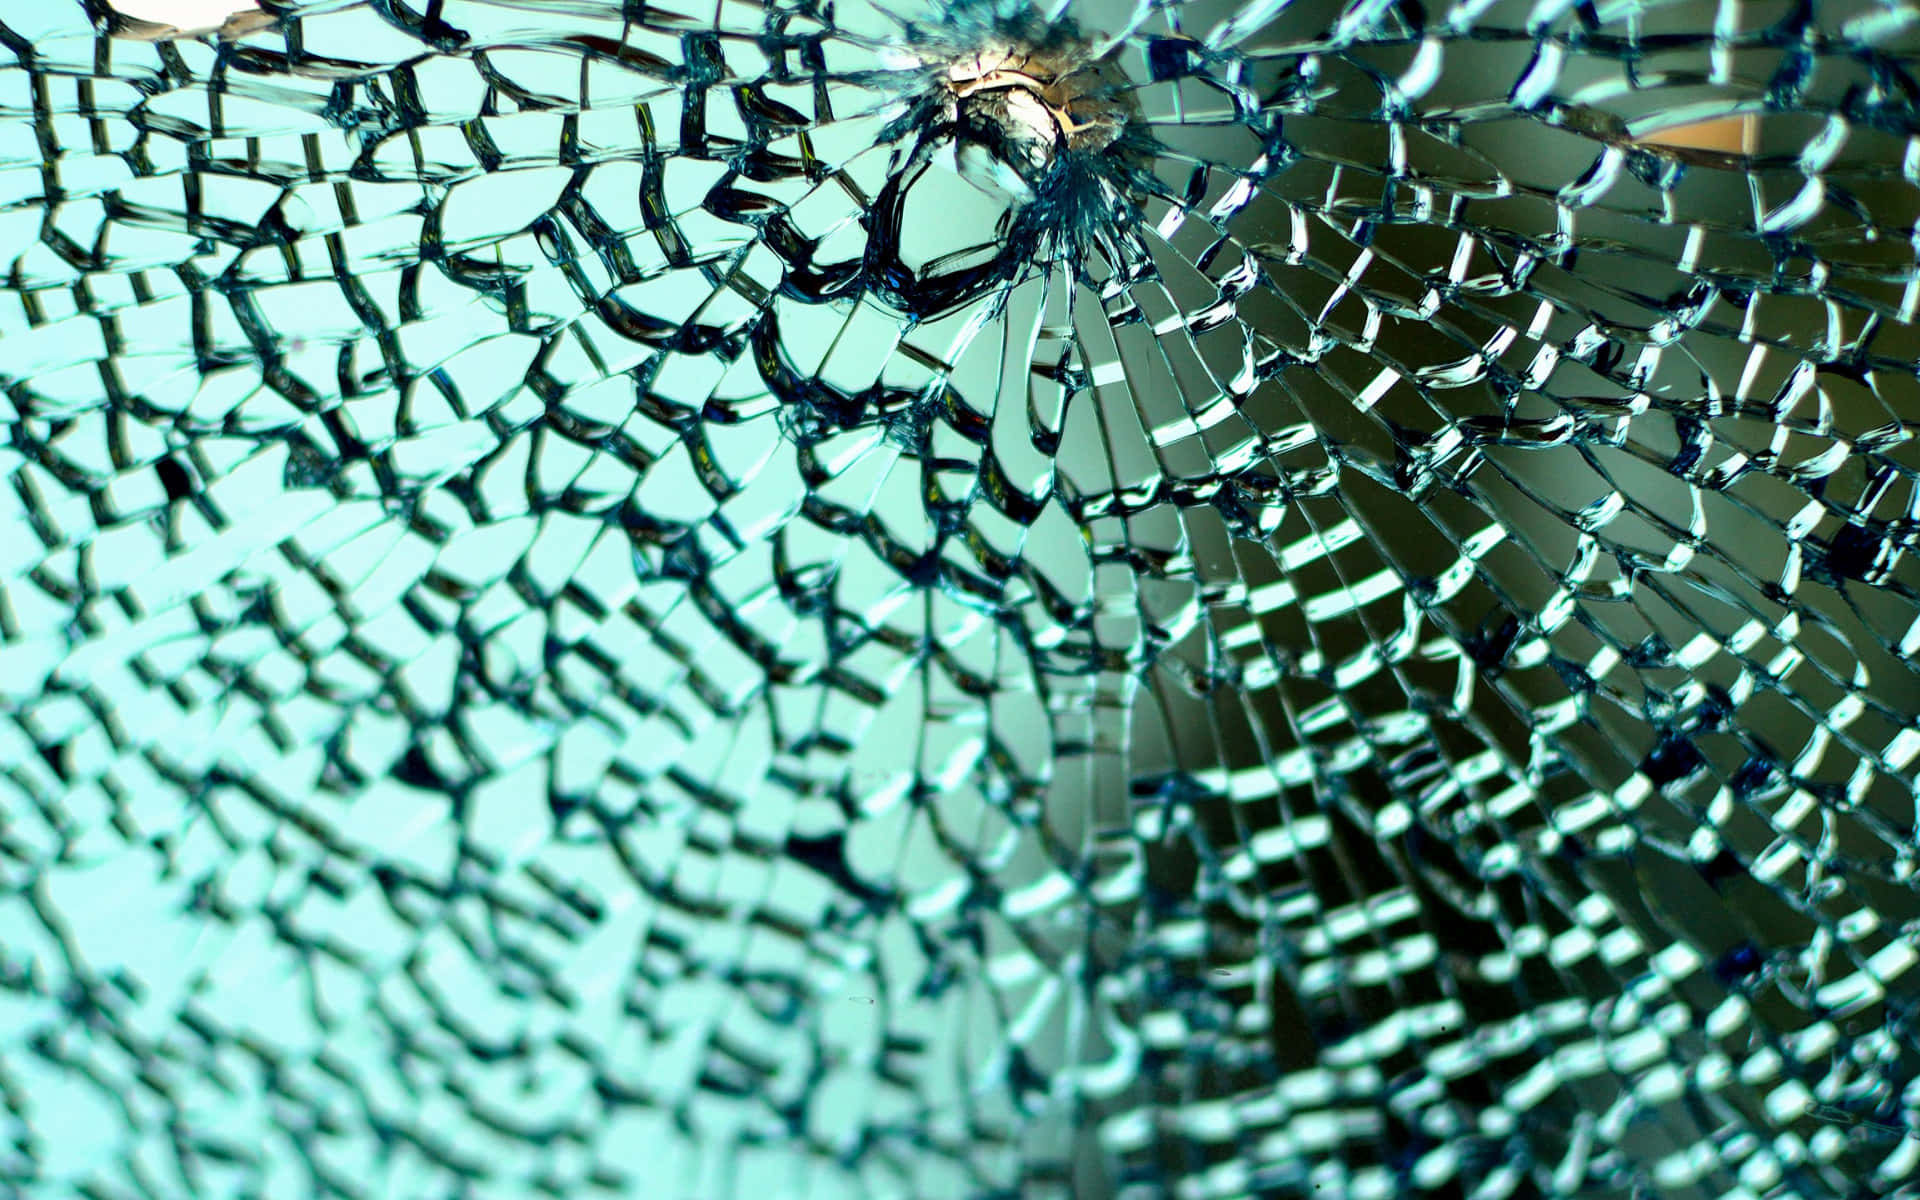 Shattered Dreams - A Close-up View of Broken Glass